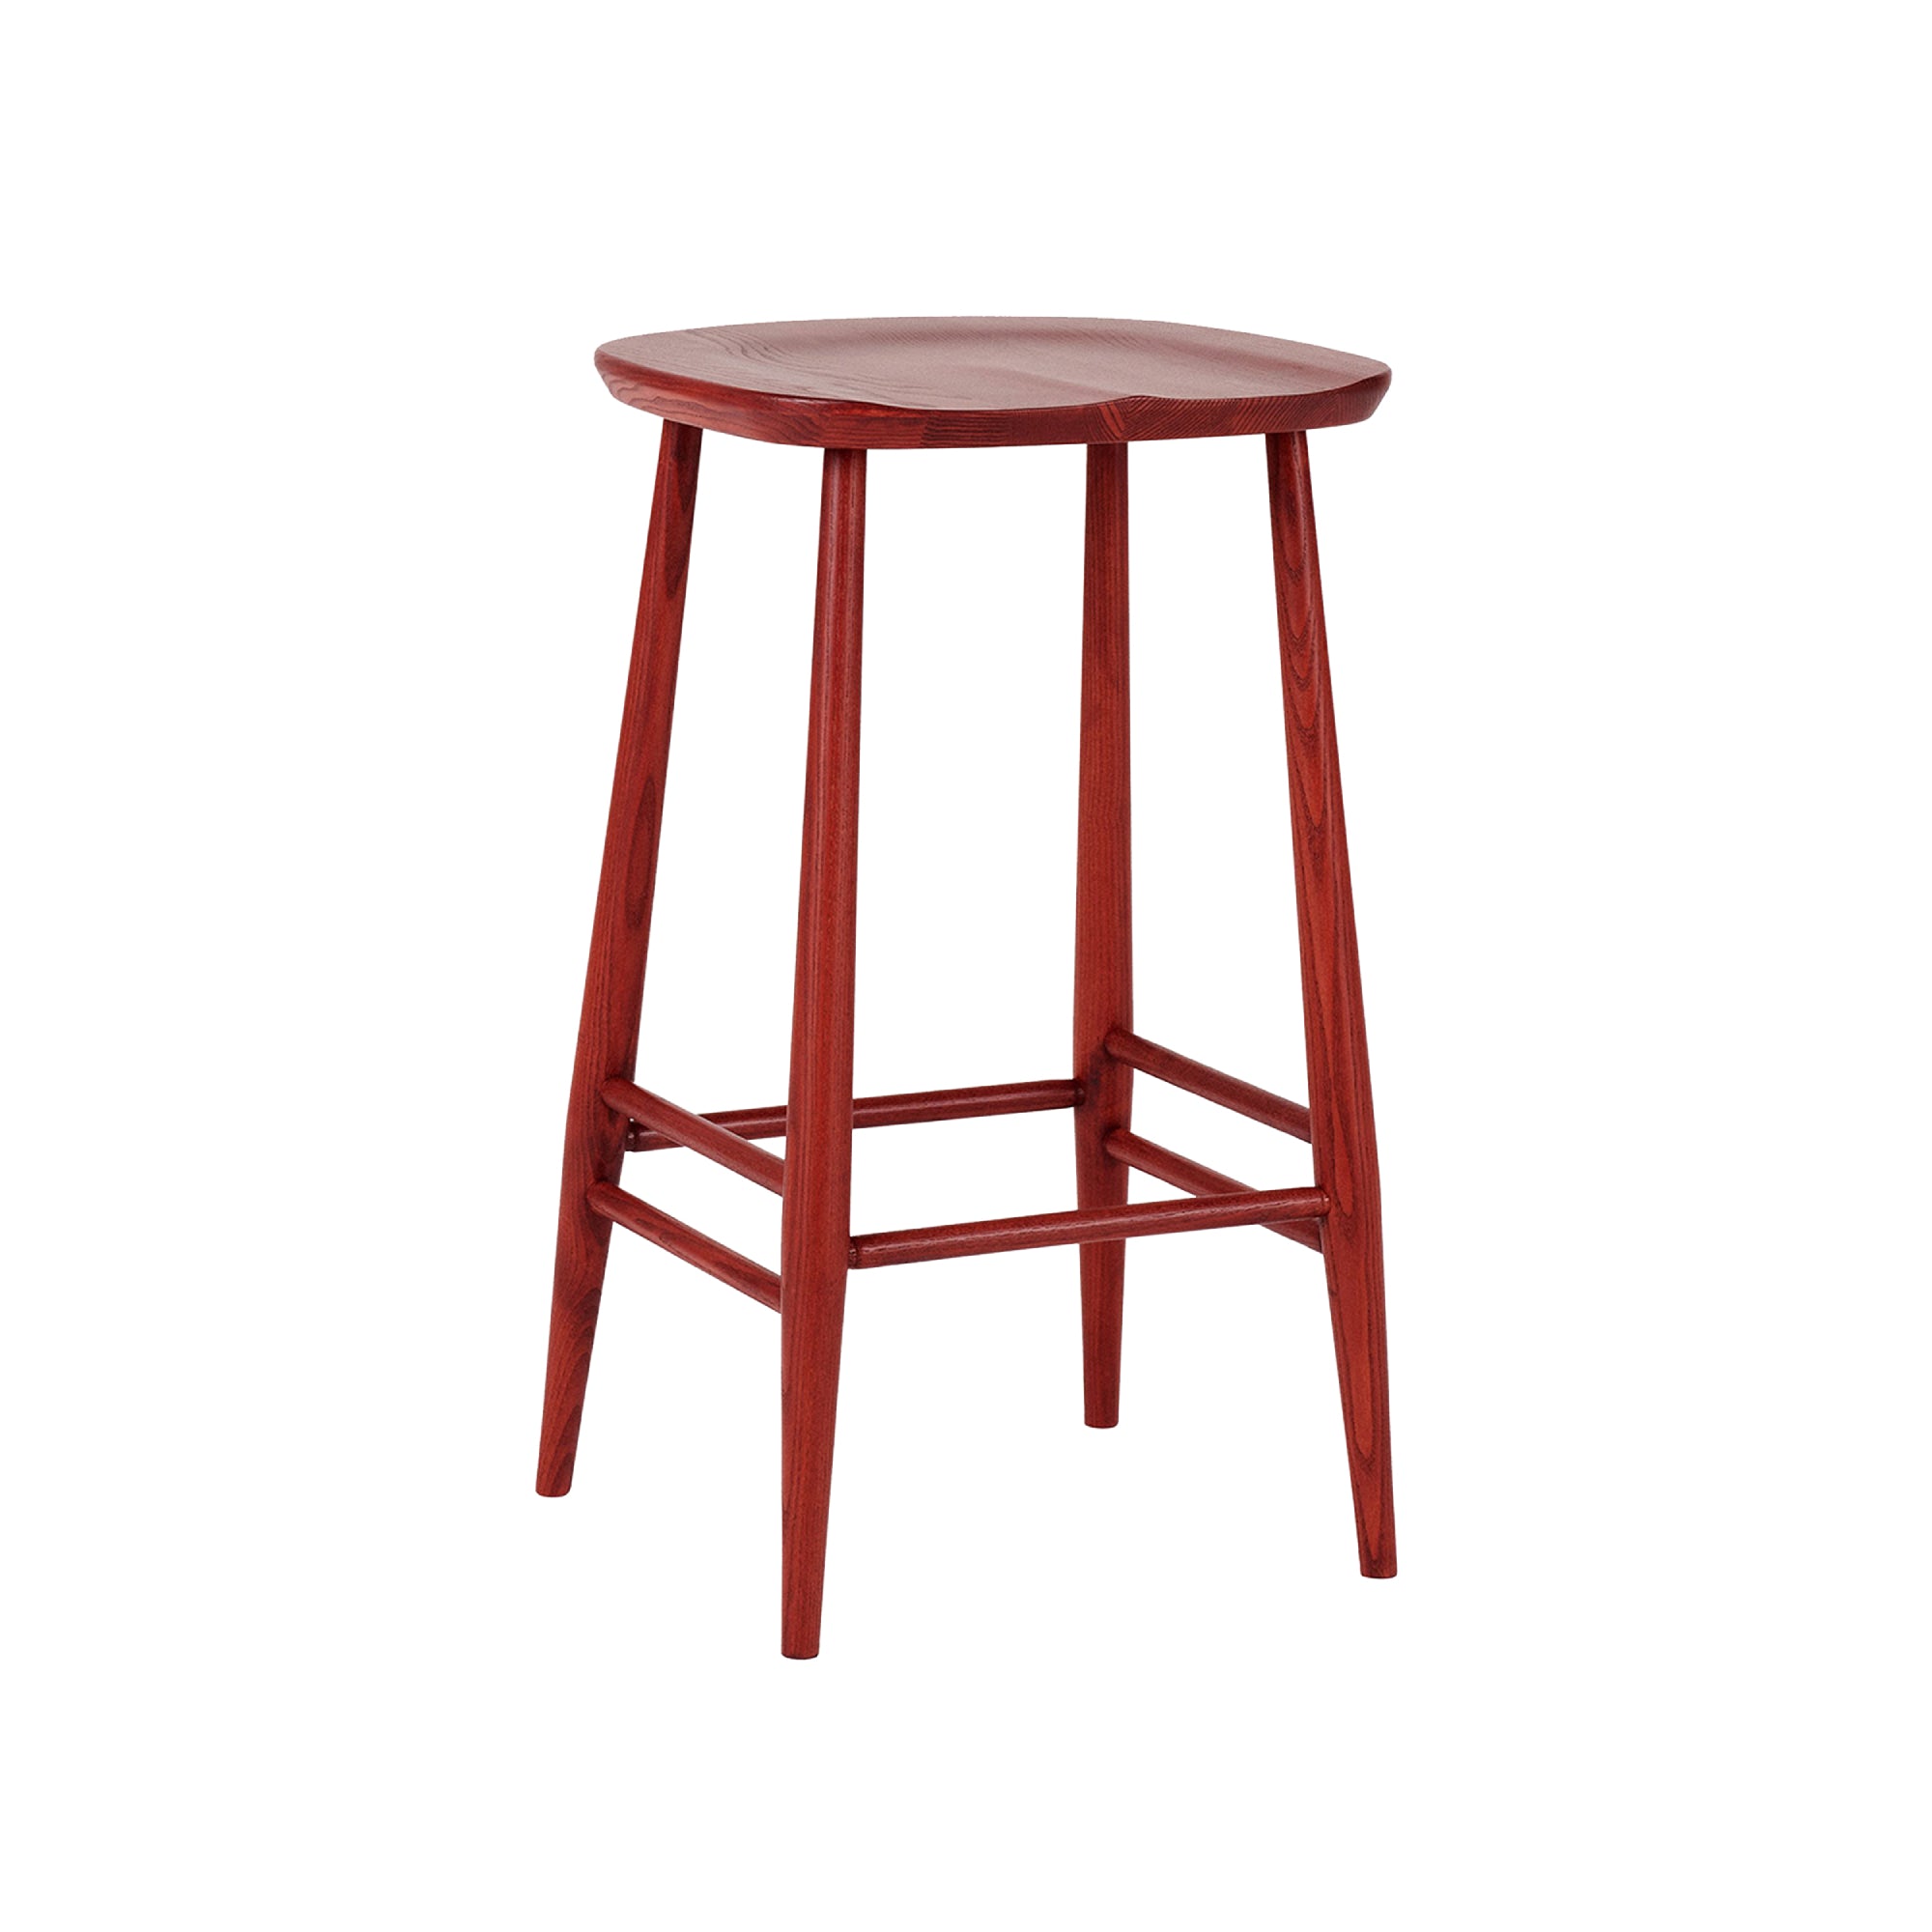 Originals Utility Bar + Counter Stool: Counter + Stained Vintage Red